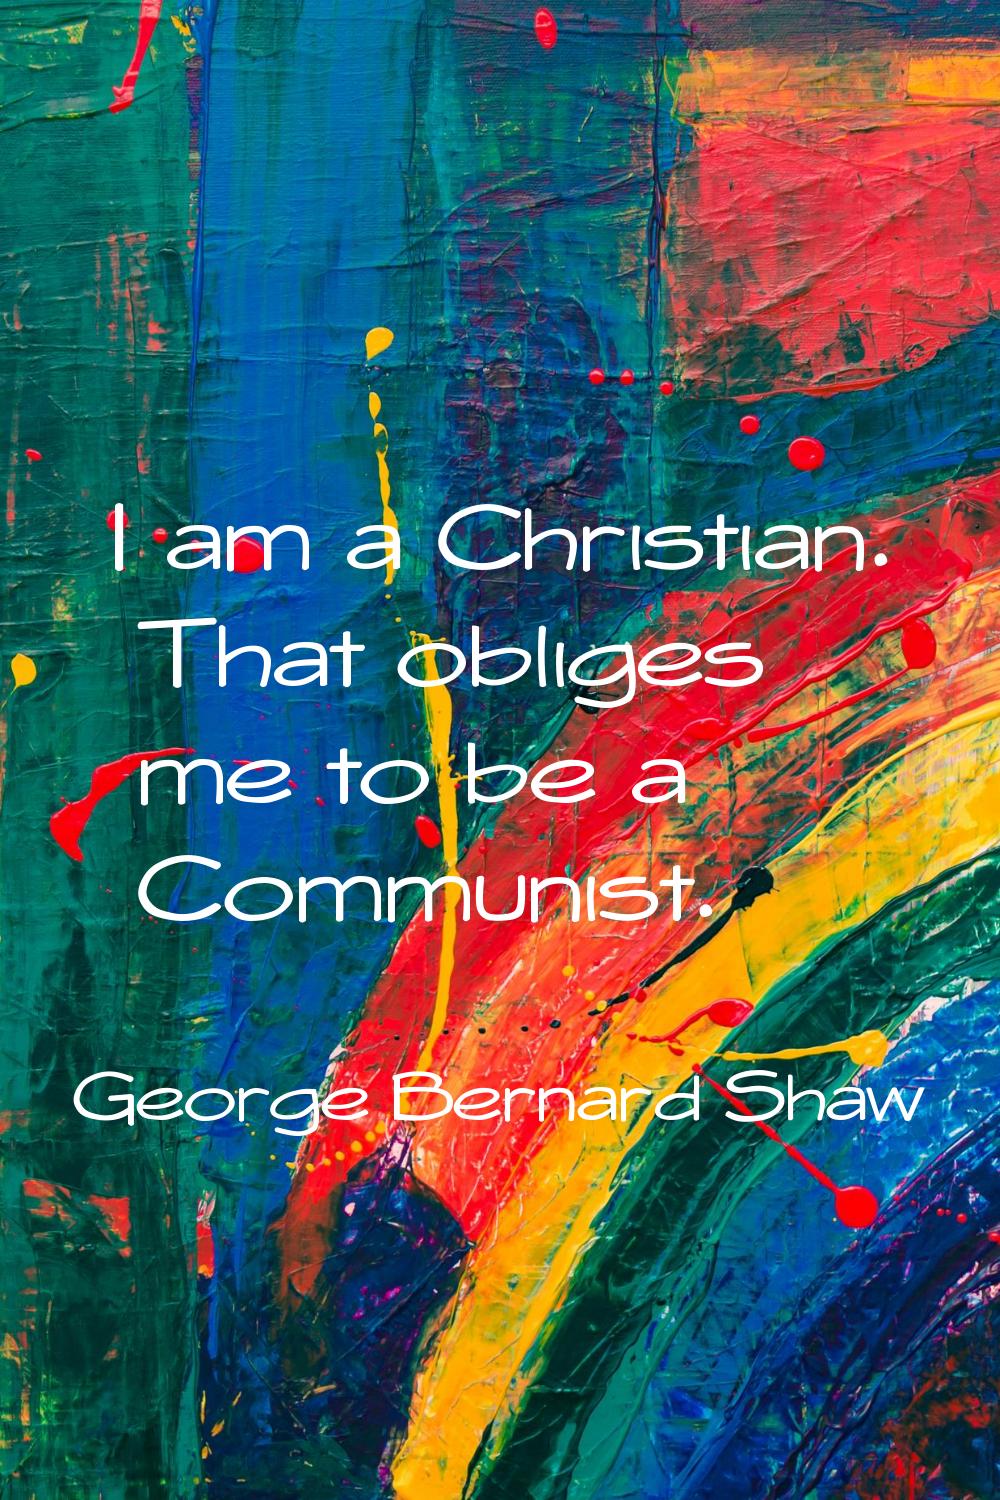 I am a Christian. That obliges me to be a Communist.